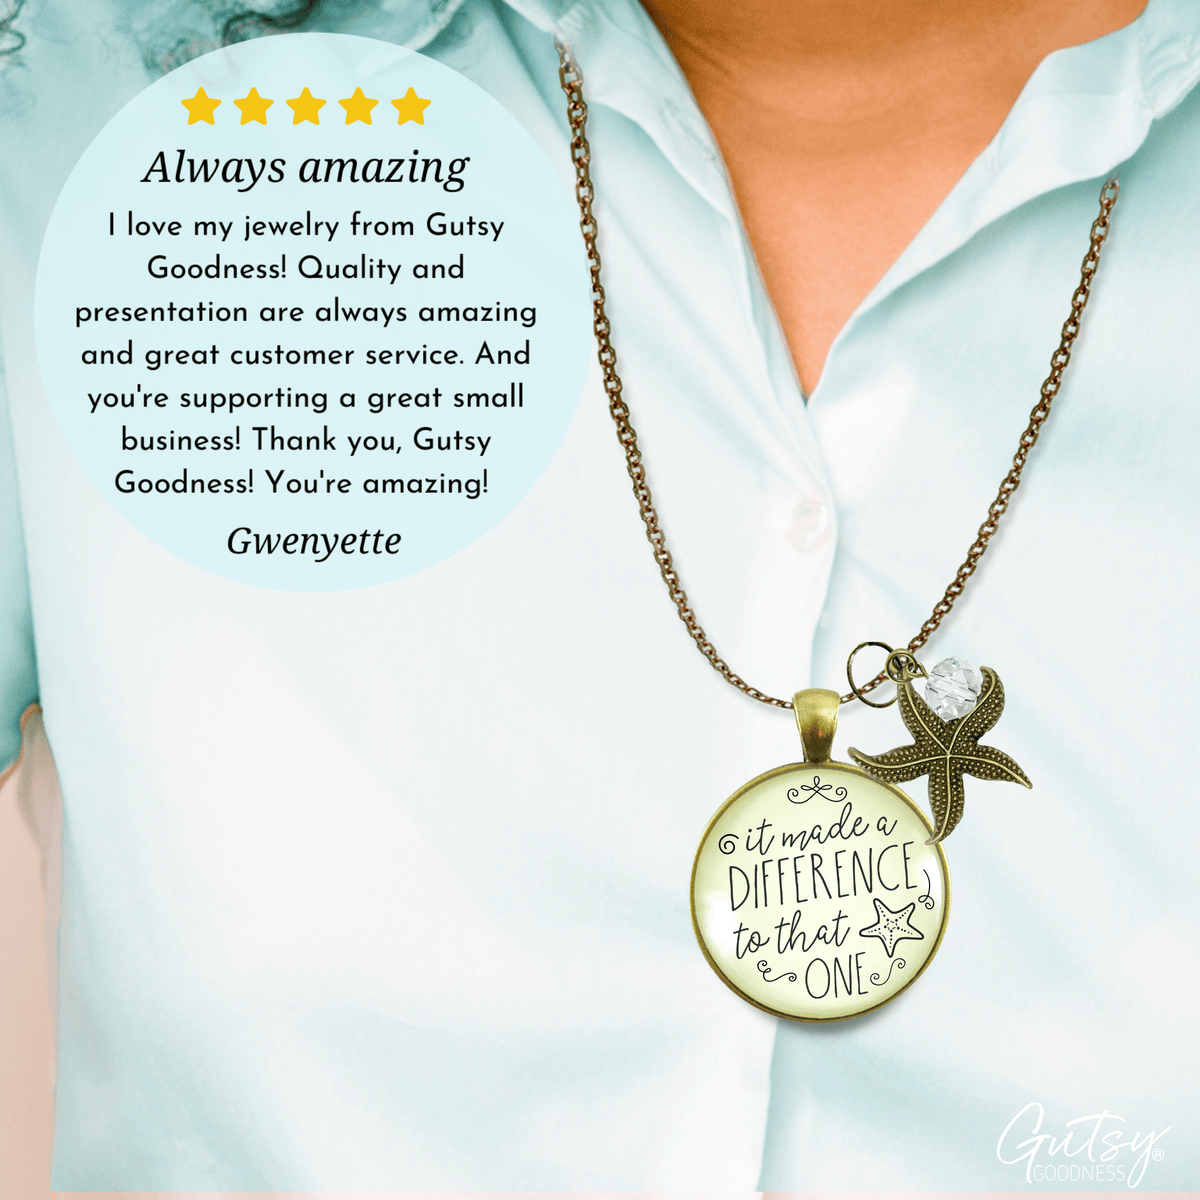 Gutsy Goodness Starfish Necklace Made Difference That One Teacher Story Appreciate Gift Jewelry - Gutsy Goodness Handmade Jewelry;Starfish Necklace Made Difference That One Teacher Story Appreciate Gift Jewelry - Gutsy Goodness Handmade Jewelry Gifts